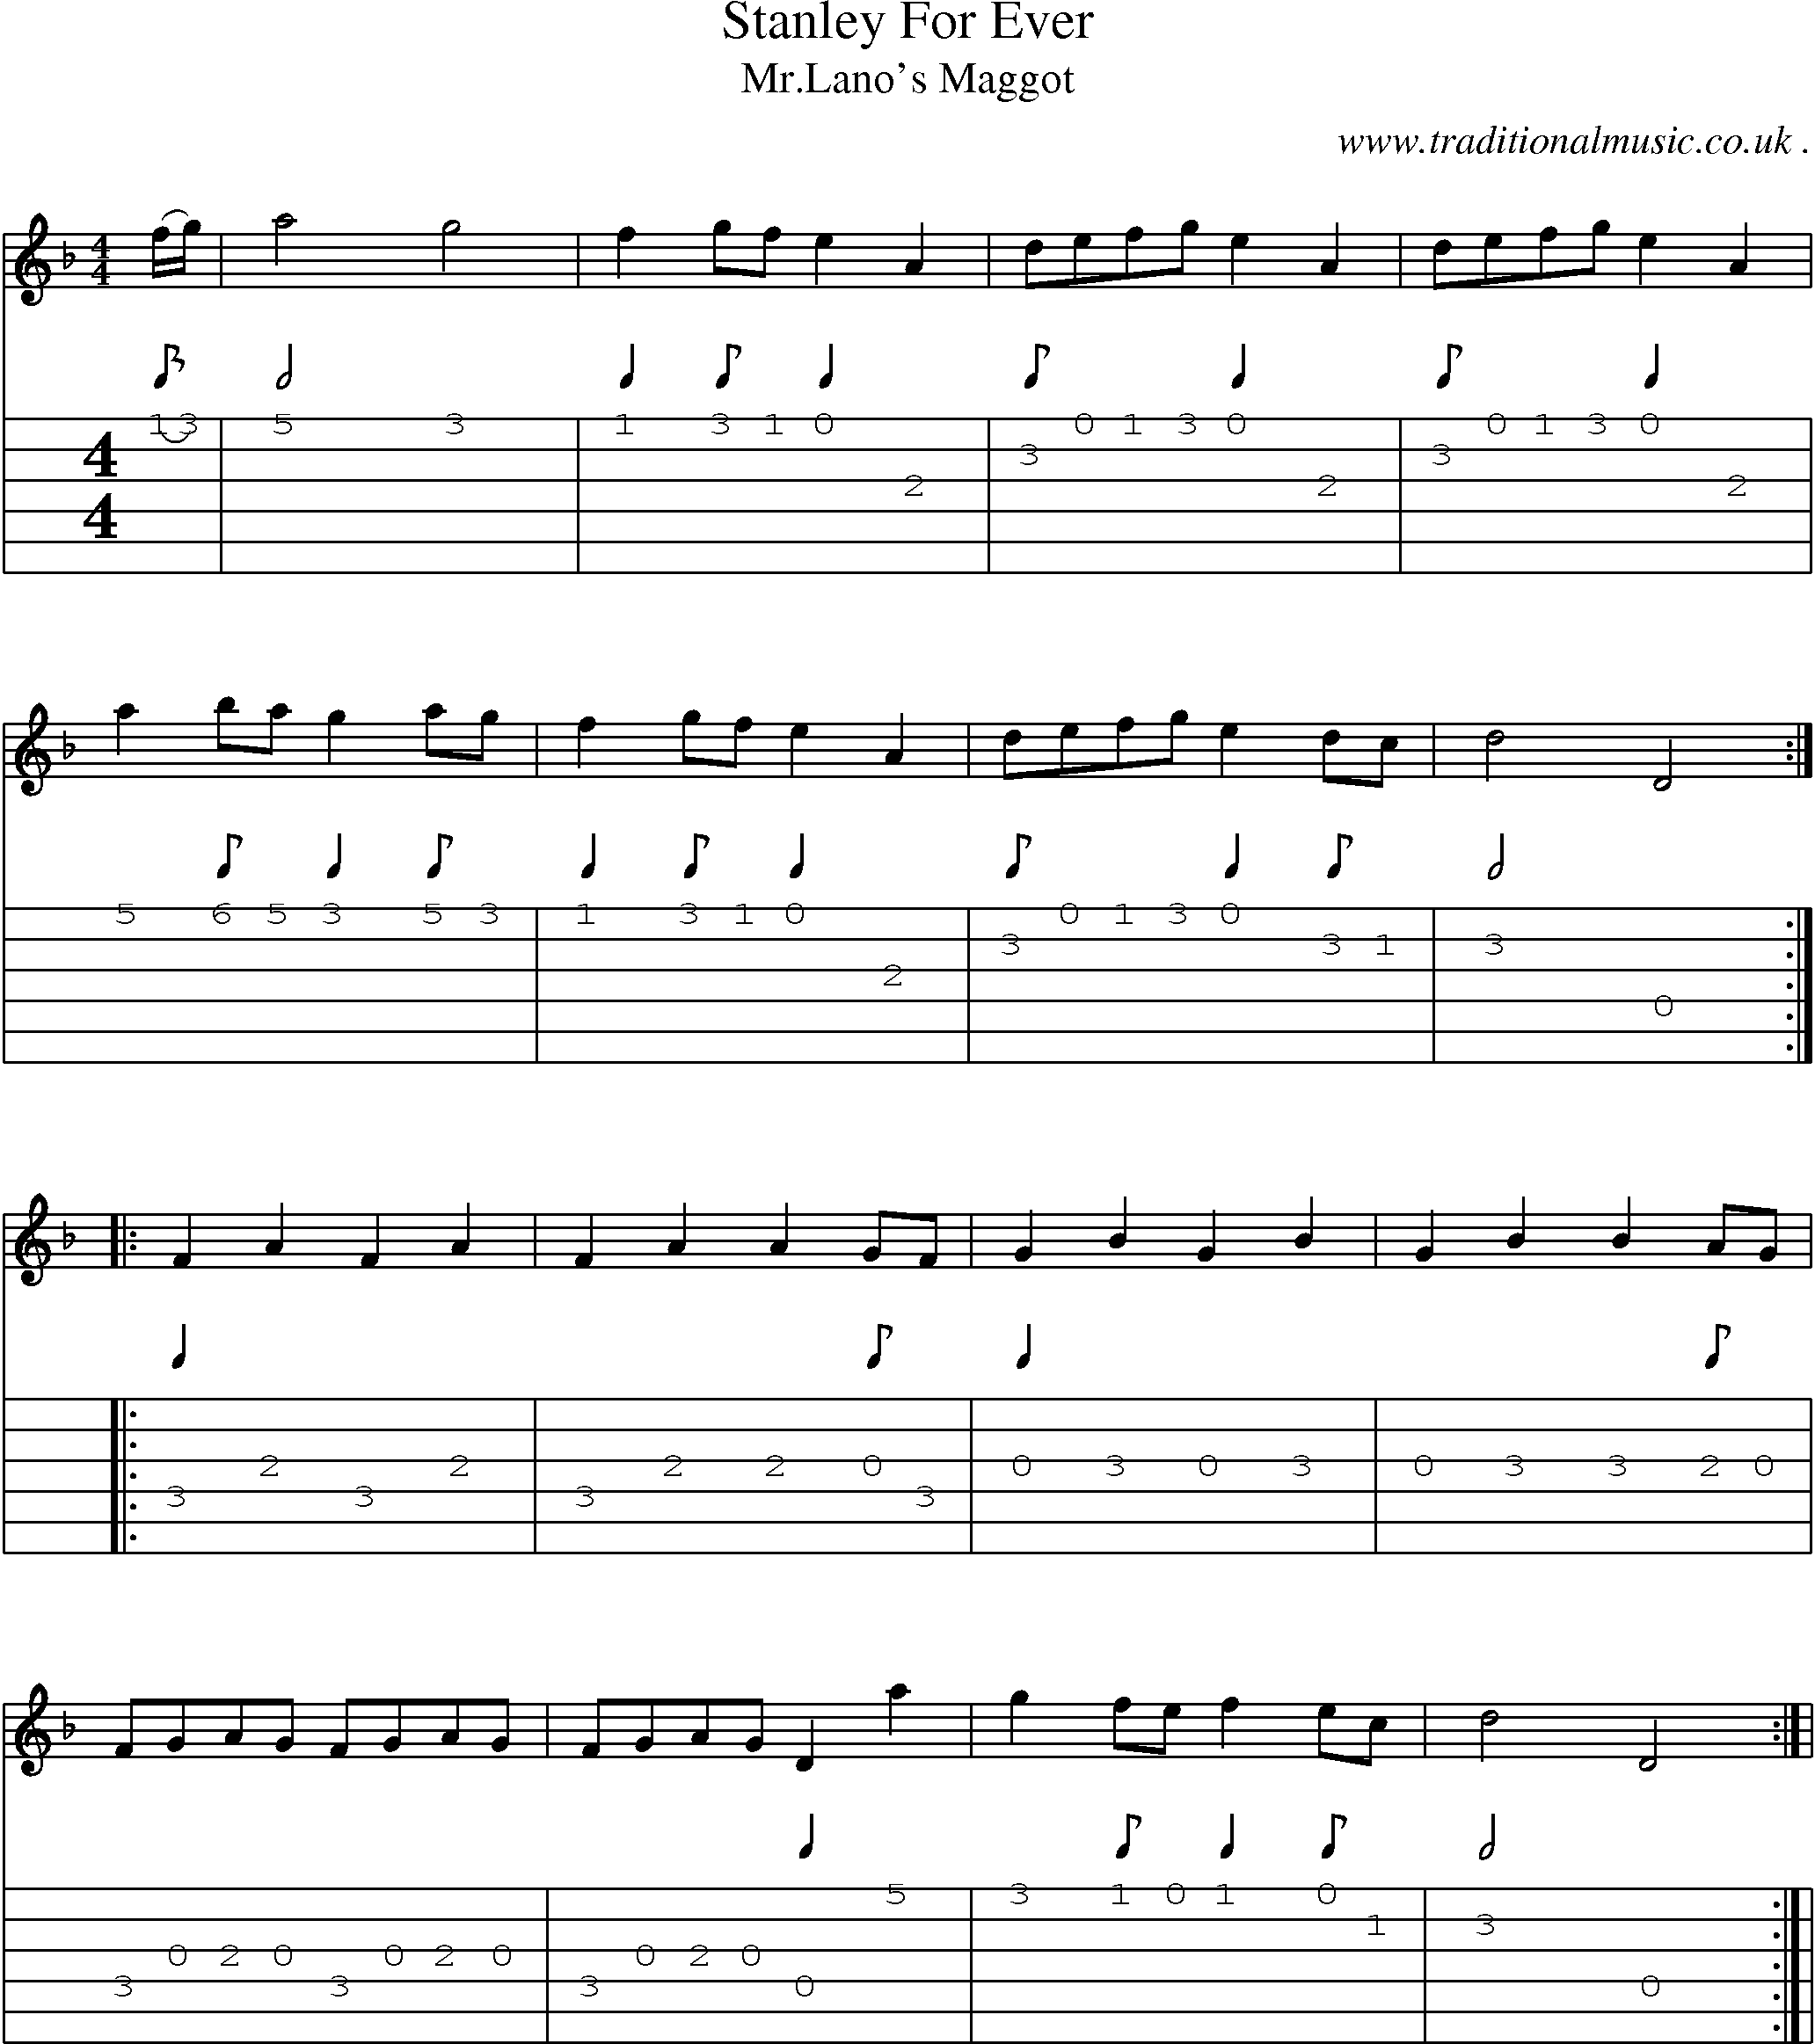 Sheet-Music and Guitar Tabs for Stanley For Ever